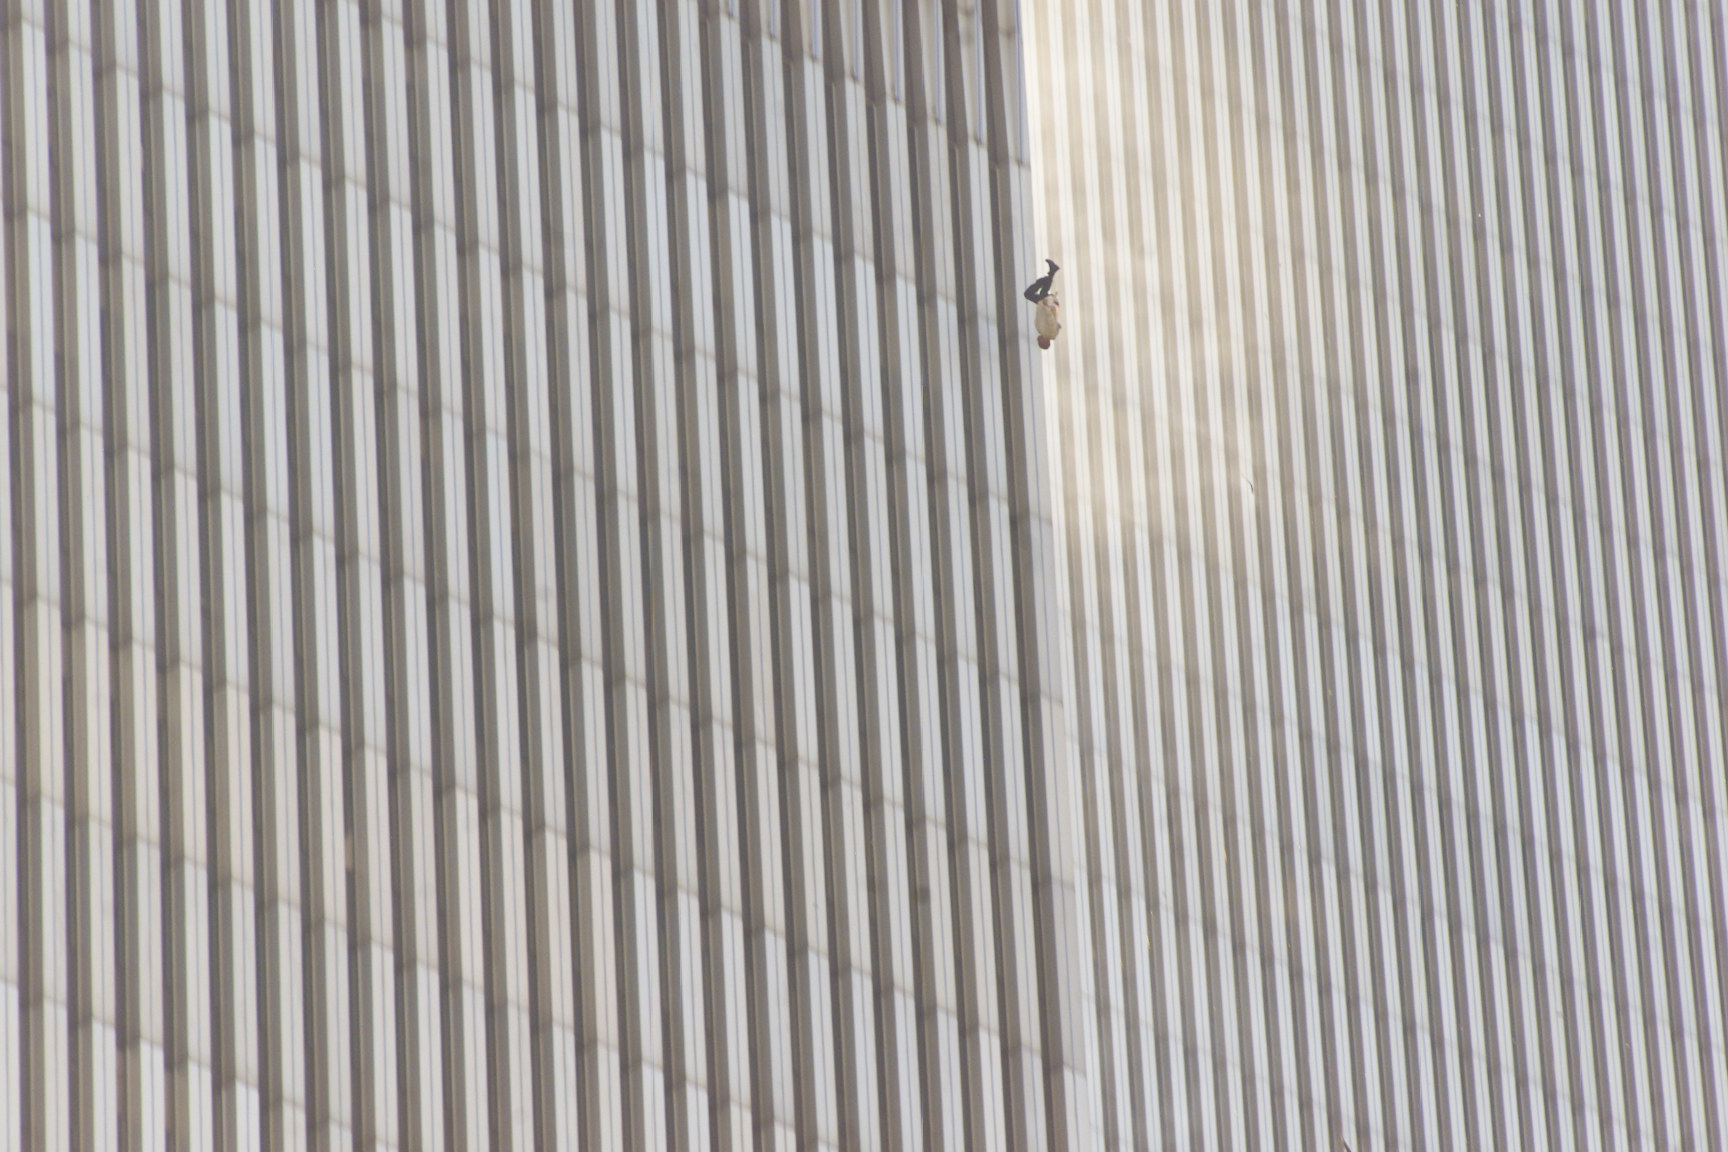 A man seen falling upside down against the walls of the World Trade Center